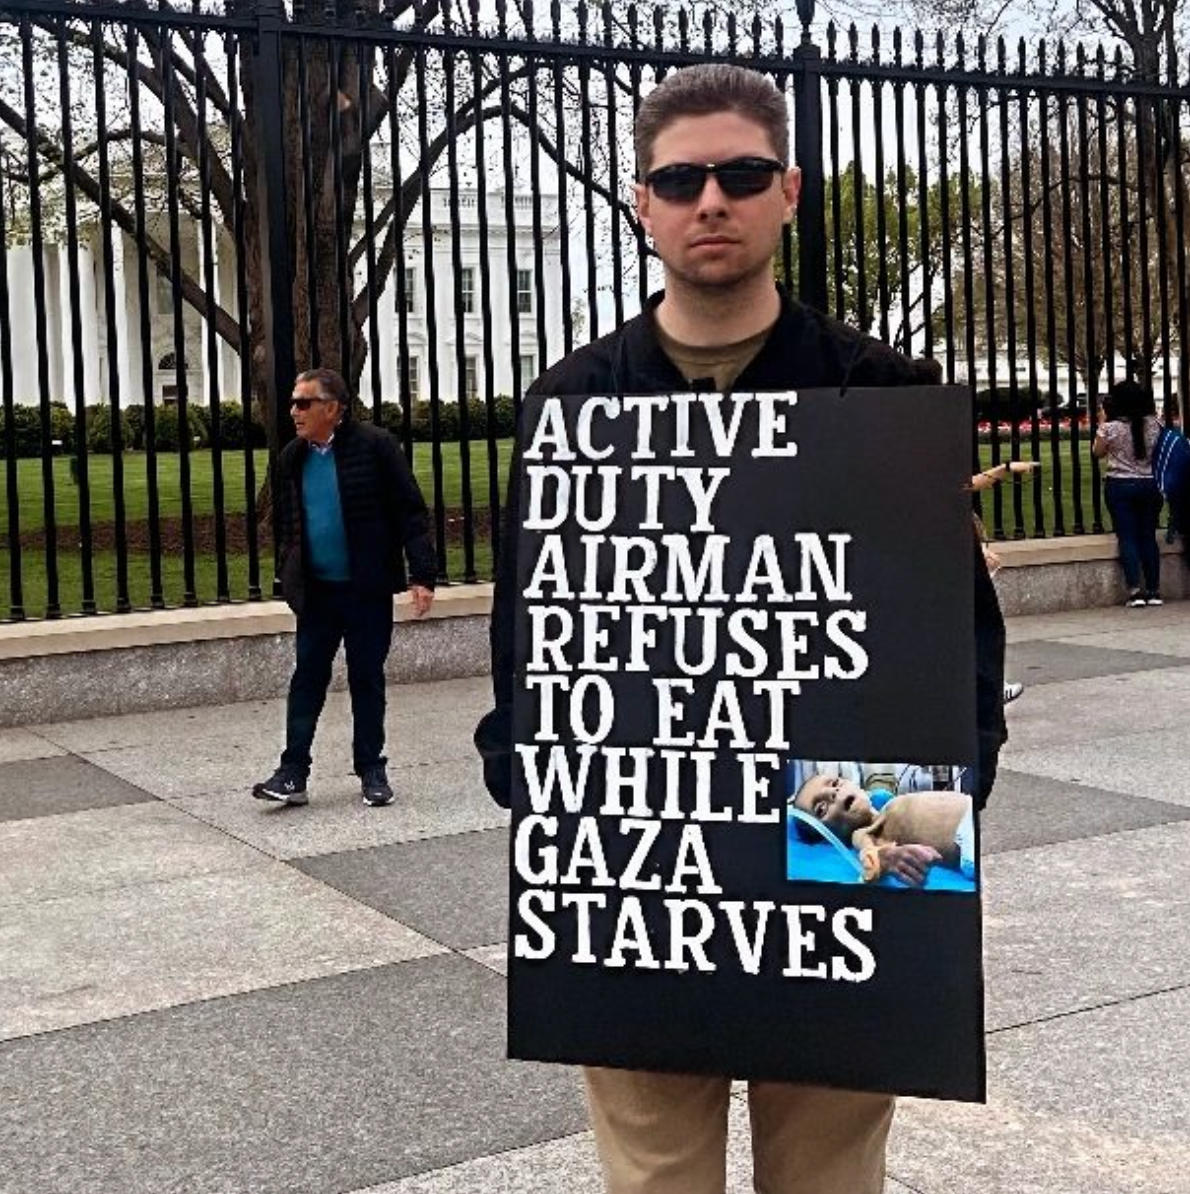 Senior Airman Larry Hebert, 26, began a hunger strike Sunday to highlight the chronic starvation in the Gaza strip brought on by the war between Hamas and Israel. Photo credit: Veterans For Peace Instagram.